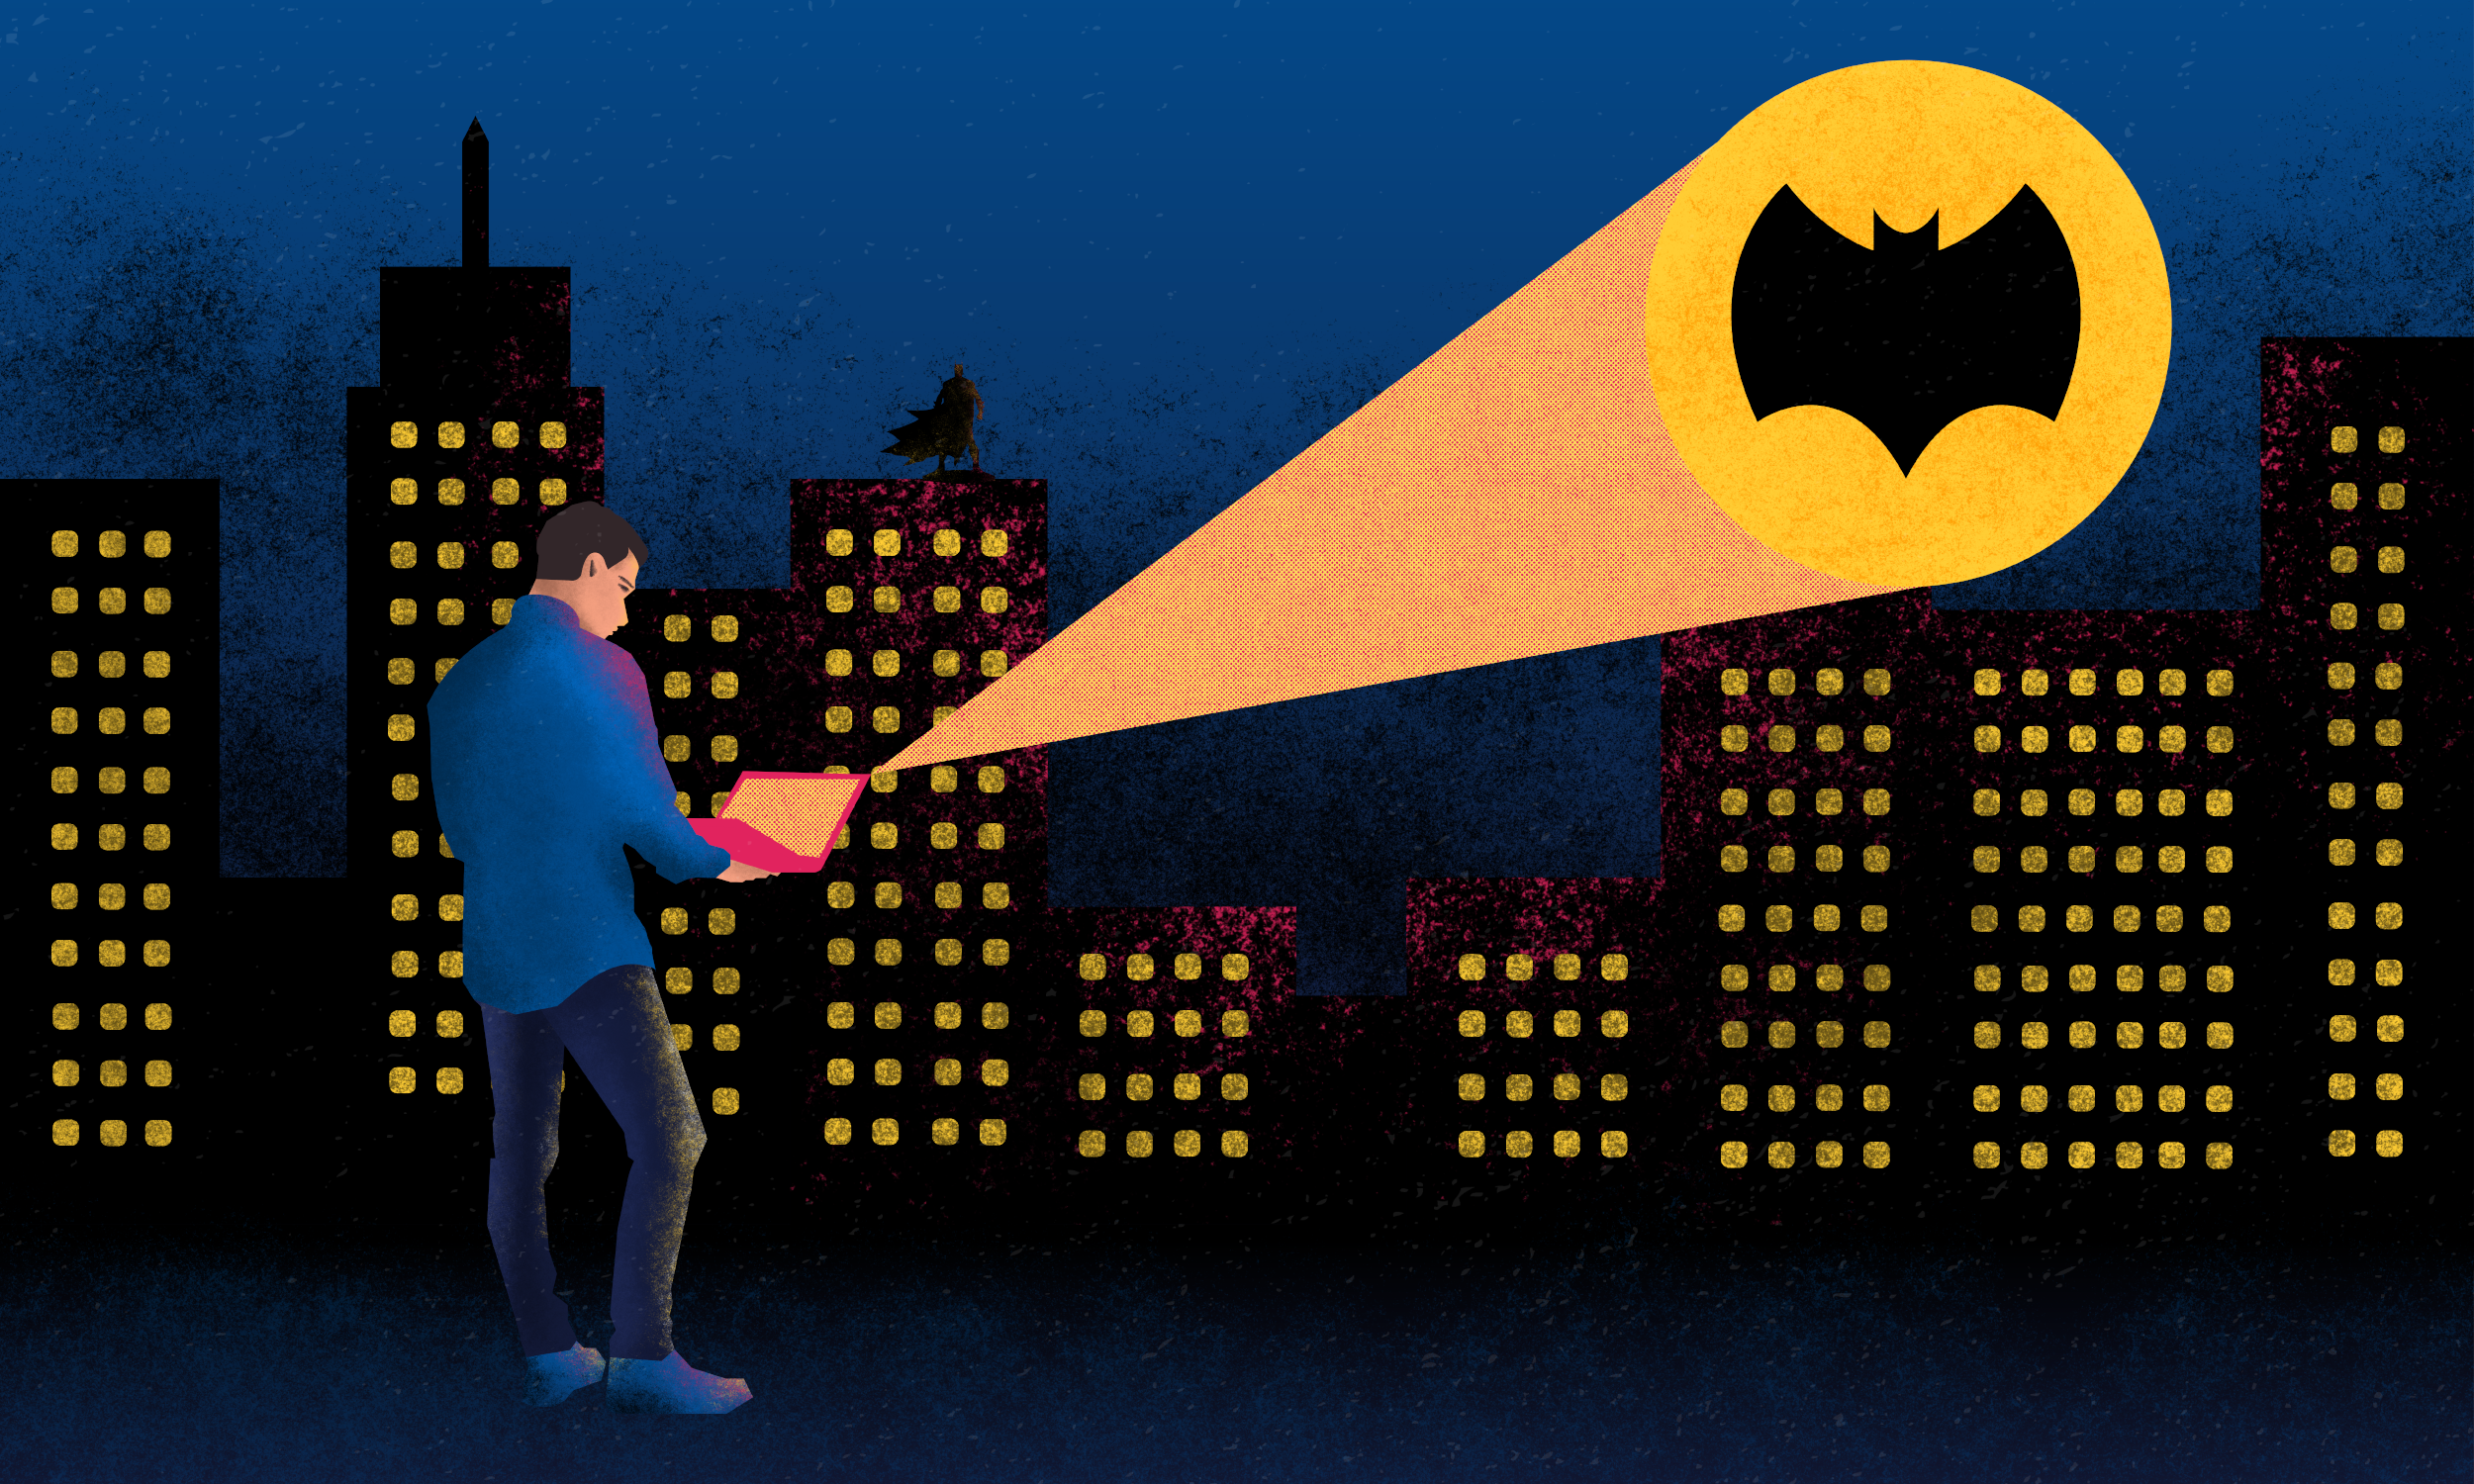 Graphic of man opening a laptop to reveal a bat signal spotlight against a city background at night